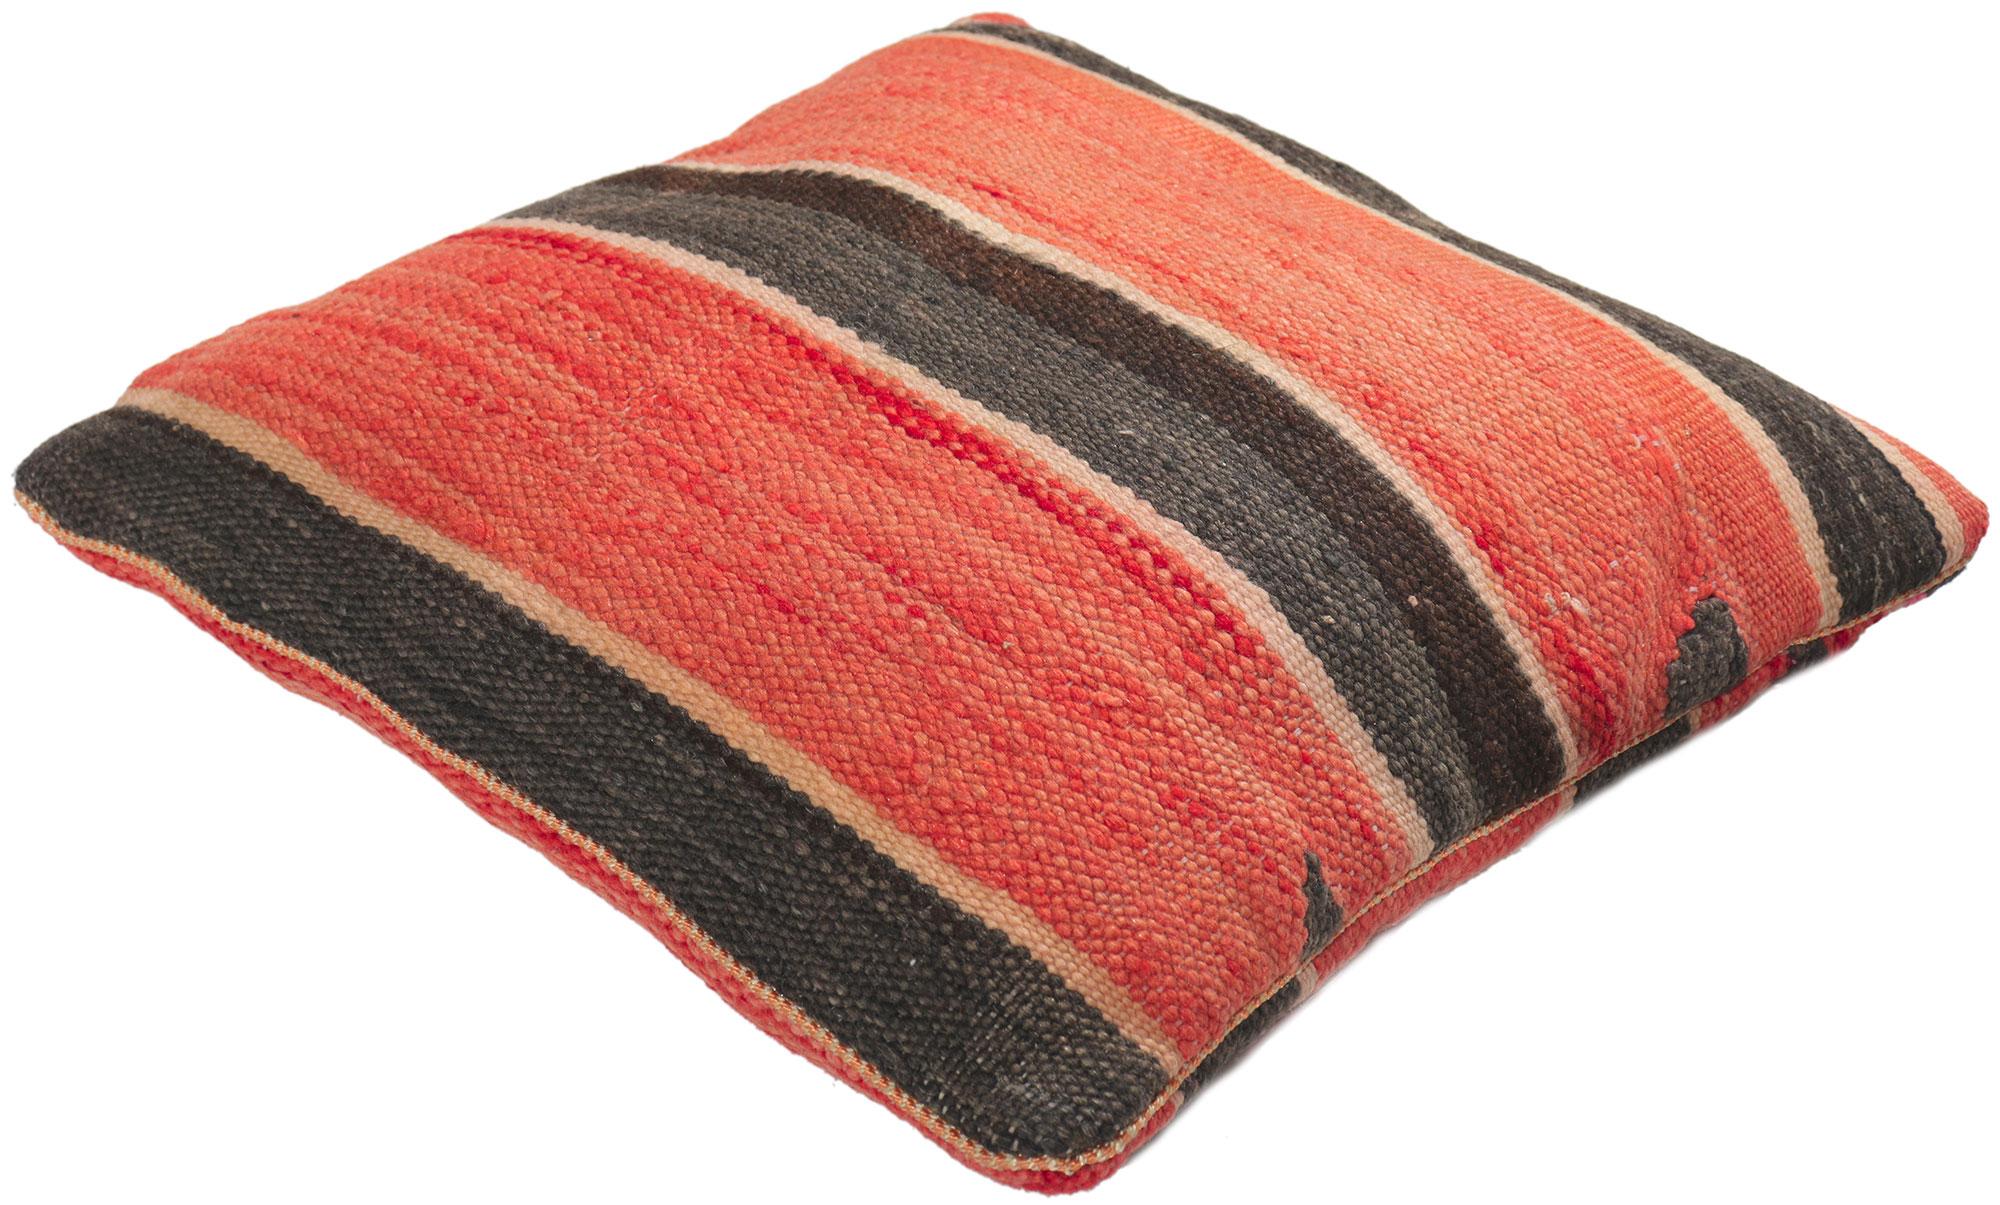 78442 Vintage Moroccan Rug Pillow, 01'05 x 01'06 x 00'04. Emanating nomadic charm with elements of comfort and functional versatility, this vintage Moroccan pillow conjures the spirit of Morocco. Made by talented artisans of the Zemmour Tribe in